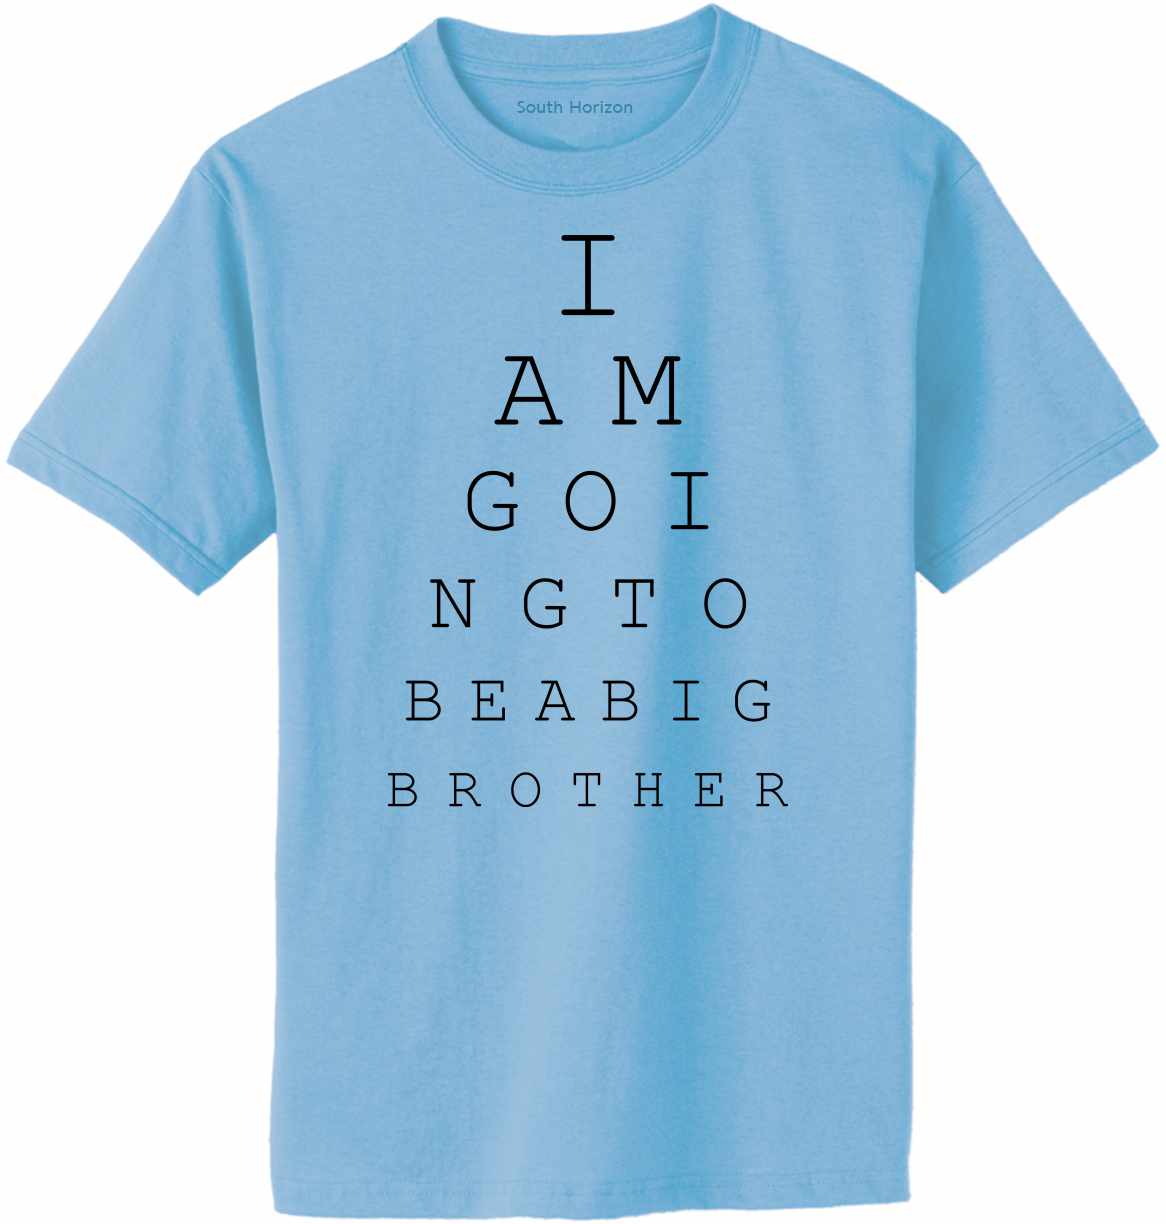 I AM GOING TO BE BIG BROTHER EYE CHART Adult T-Shirt (#1008-1)